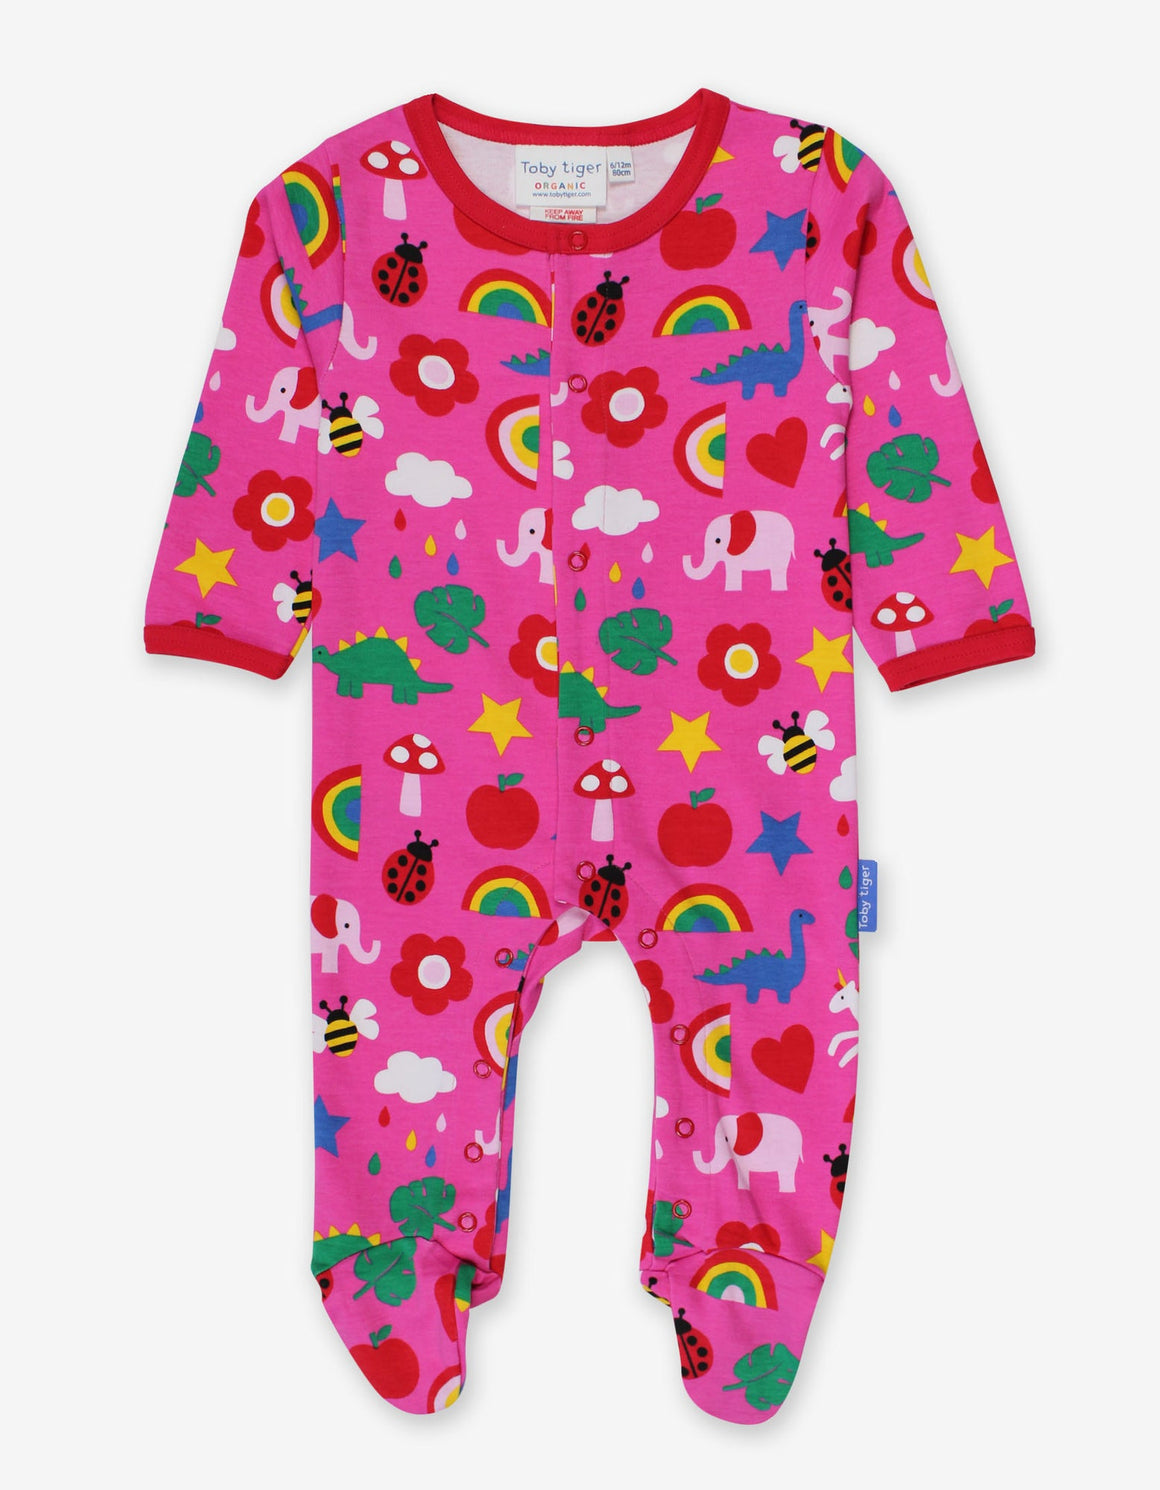 pink babygrow with colourful print featuring rainbows, animals, toadstools, hearts, lined with red around the neckline and sleeves